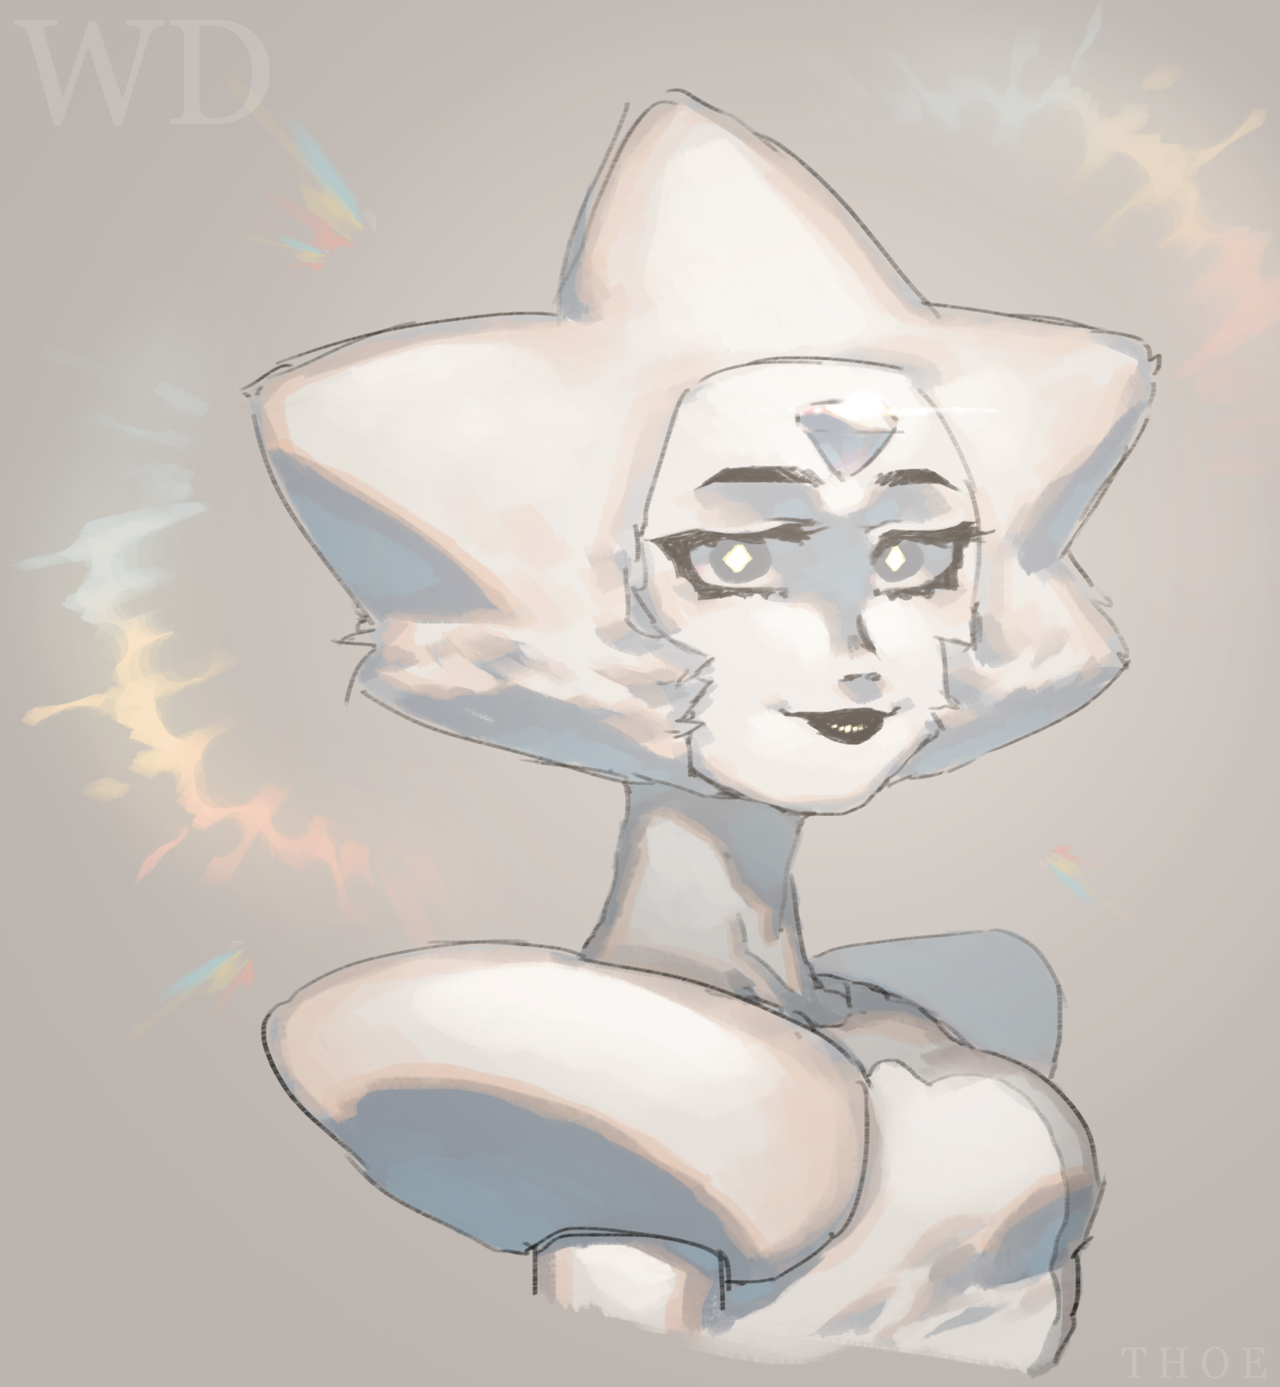 White Diamond doodle. she snatched my weave honestly